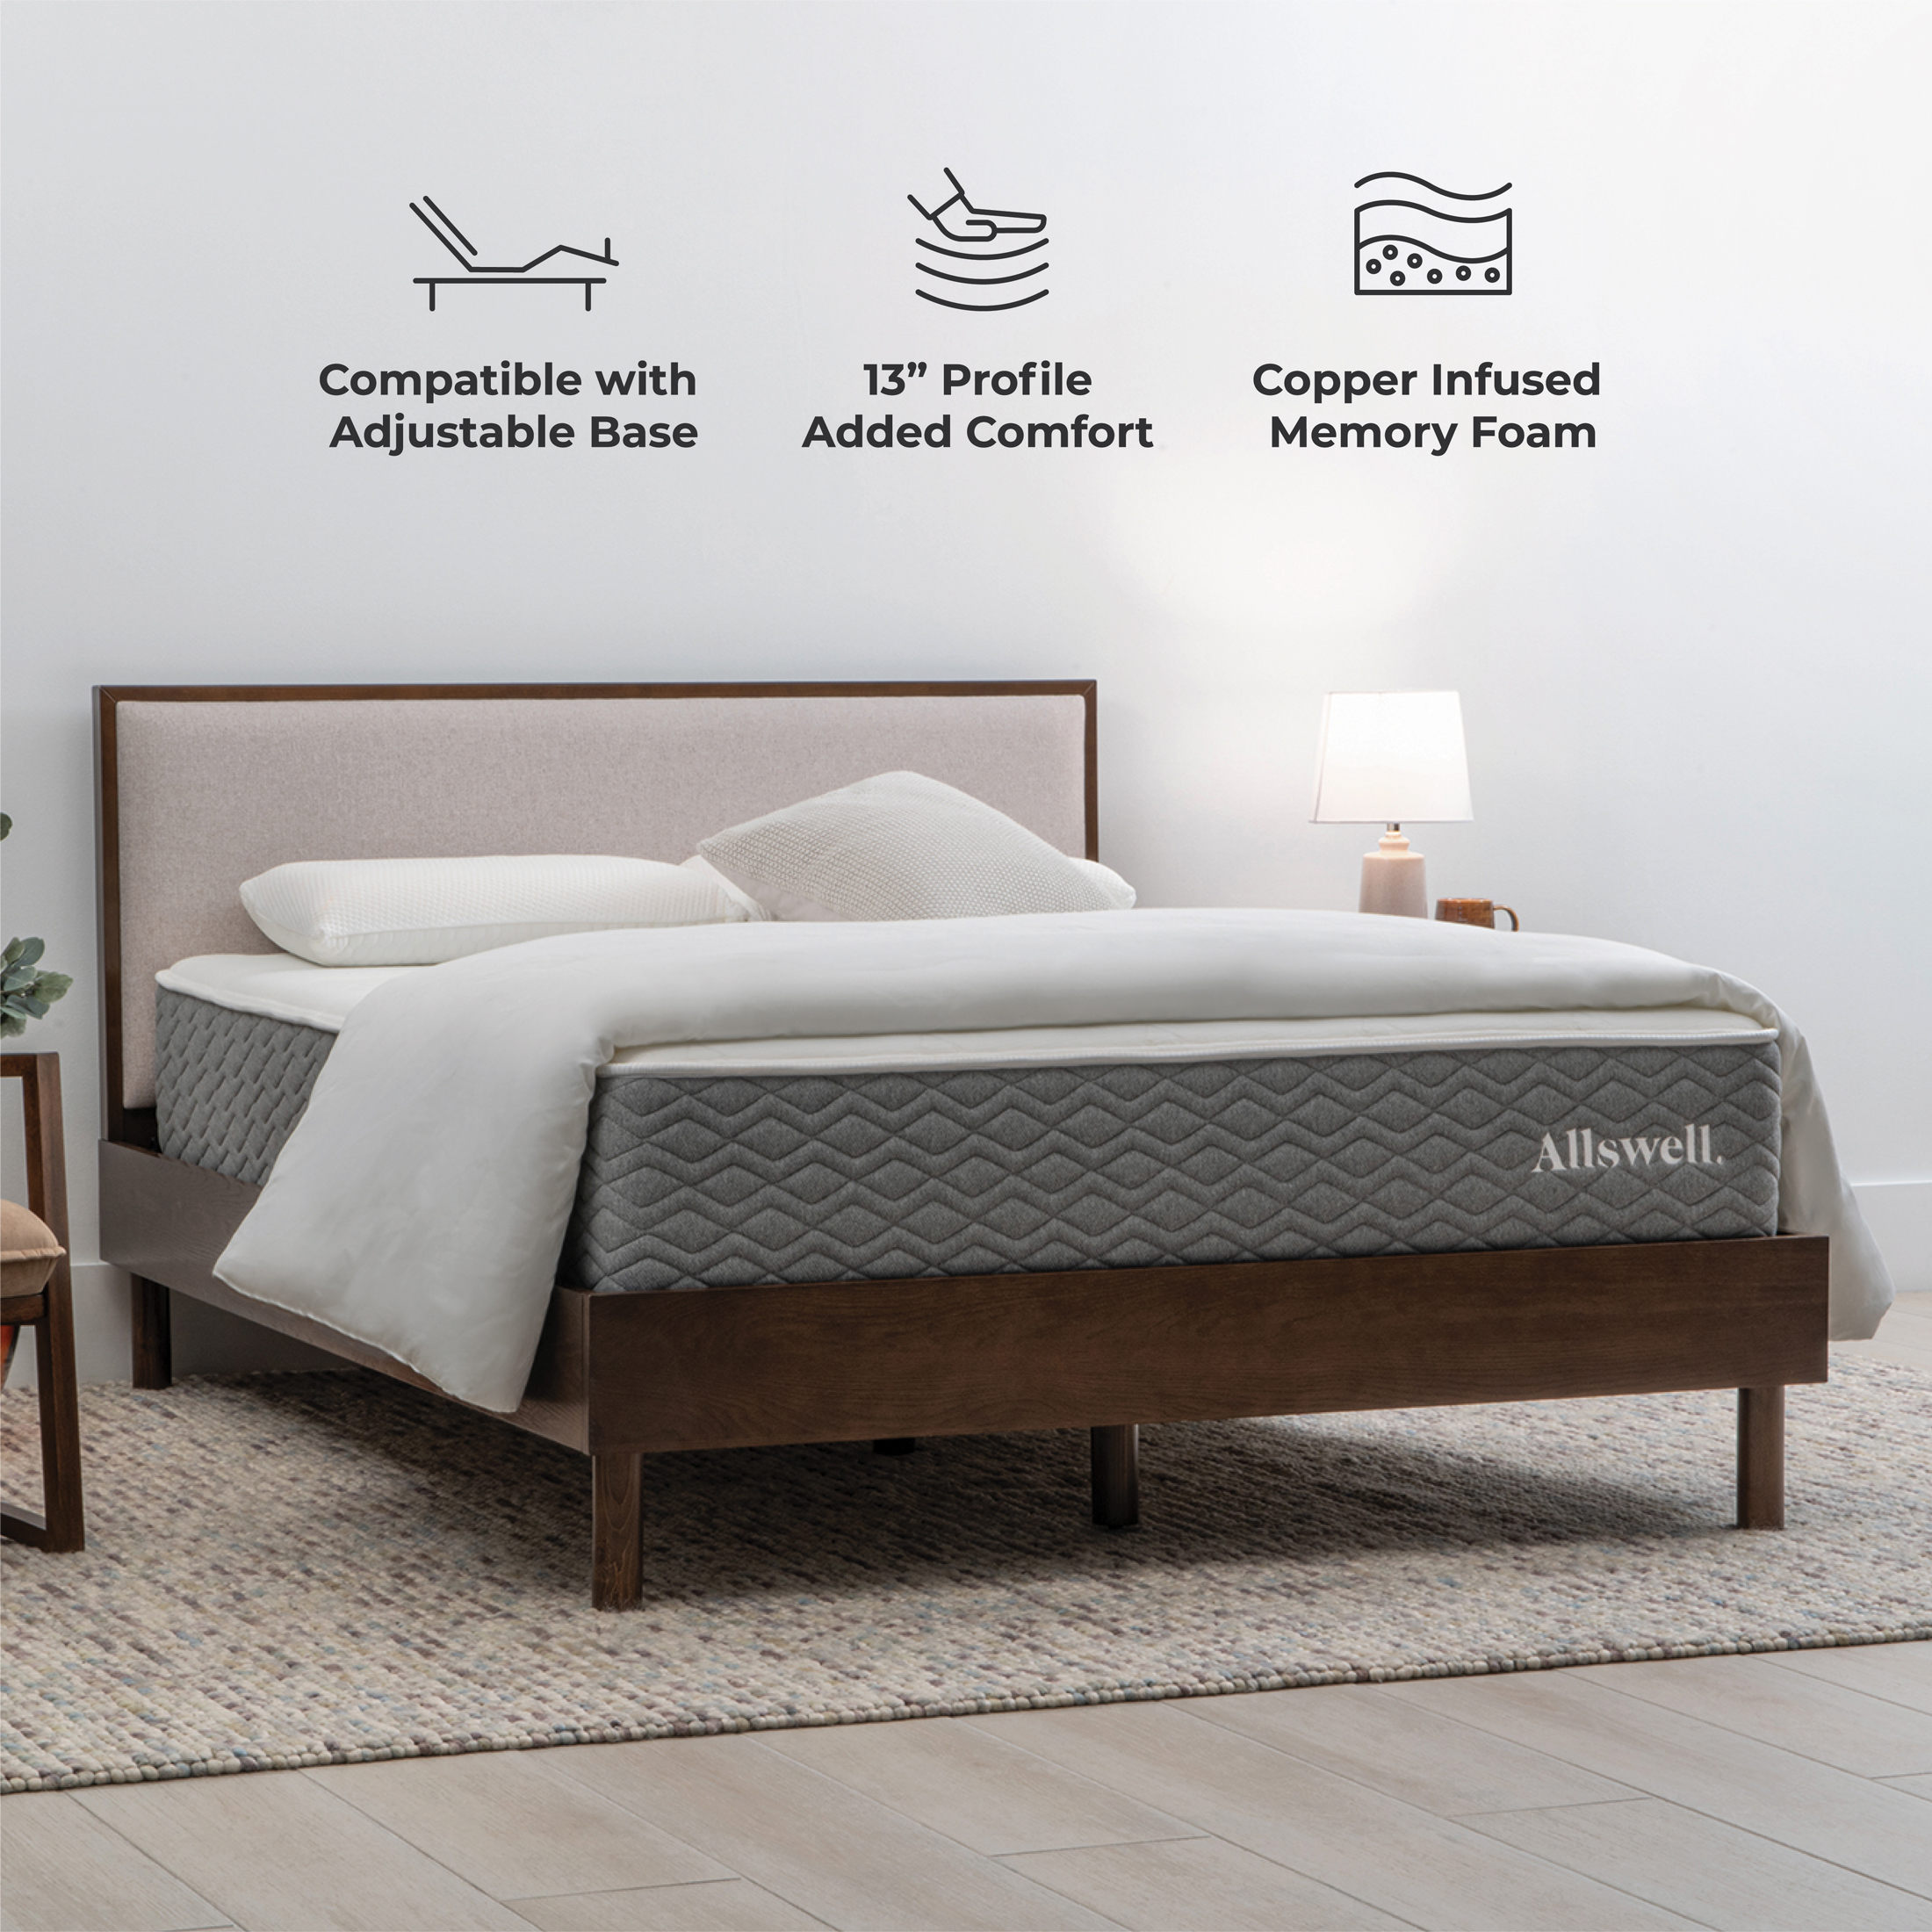 The Allswell Luxe 12" Bed in a Box Hybrid Mattress, Queen - image 3 of 7